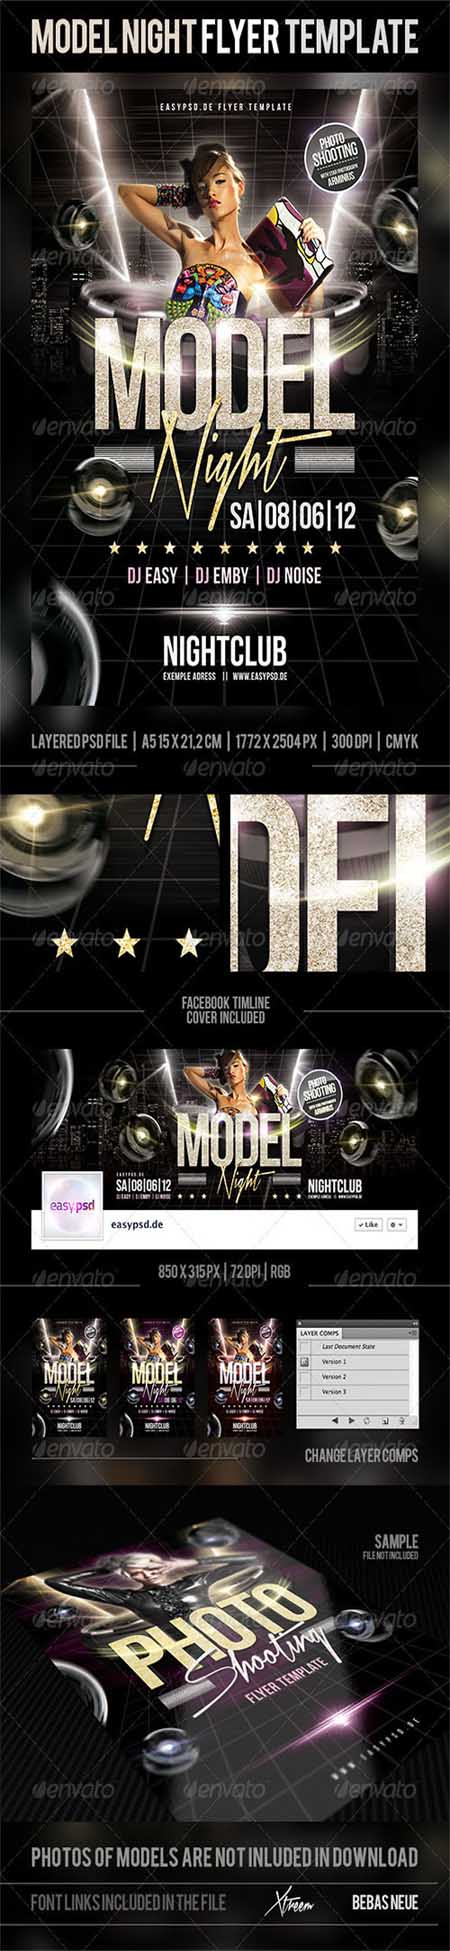 GraphicRiver Model Night Flyer Template Photoshop